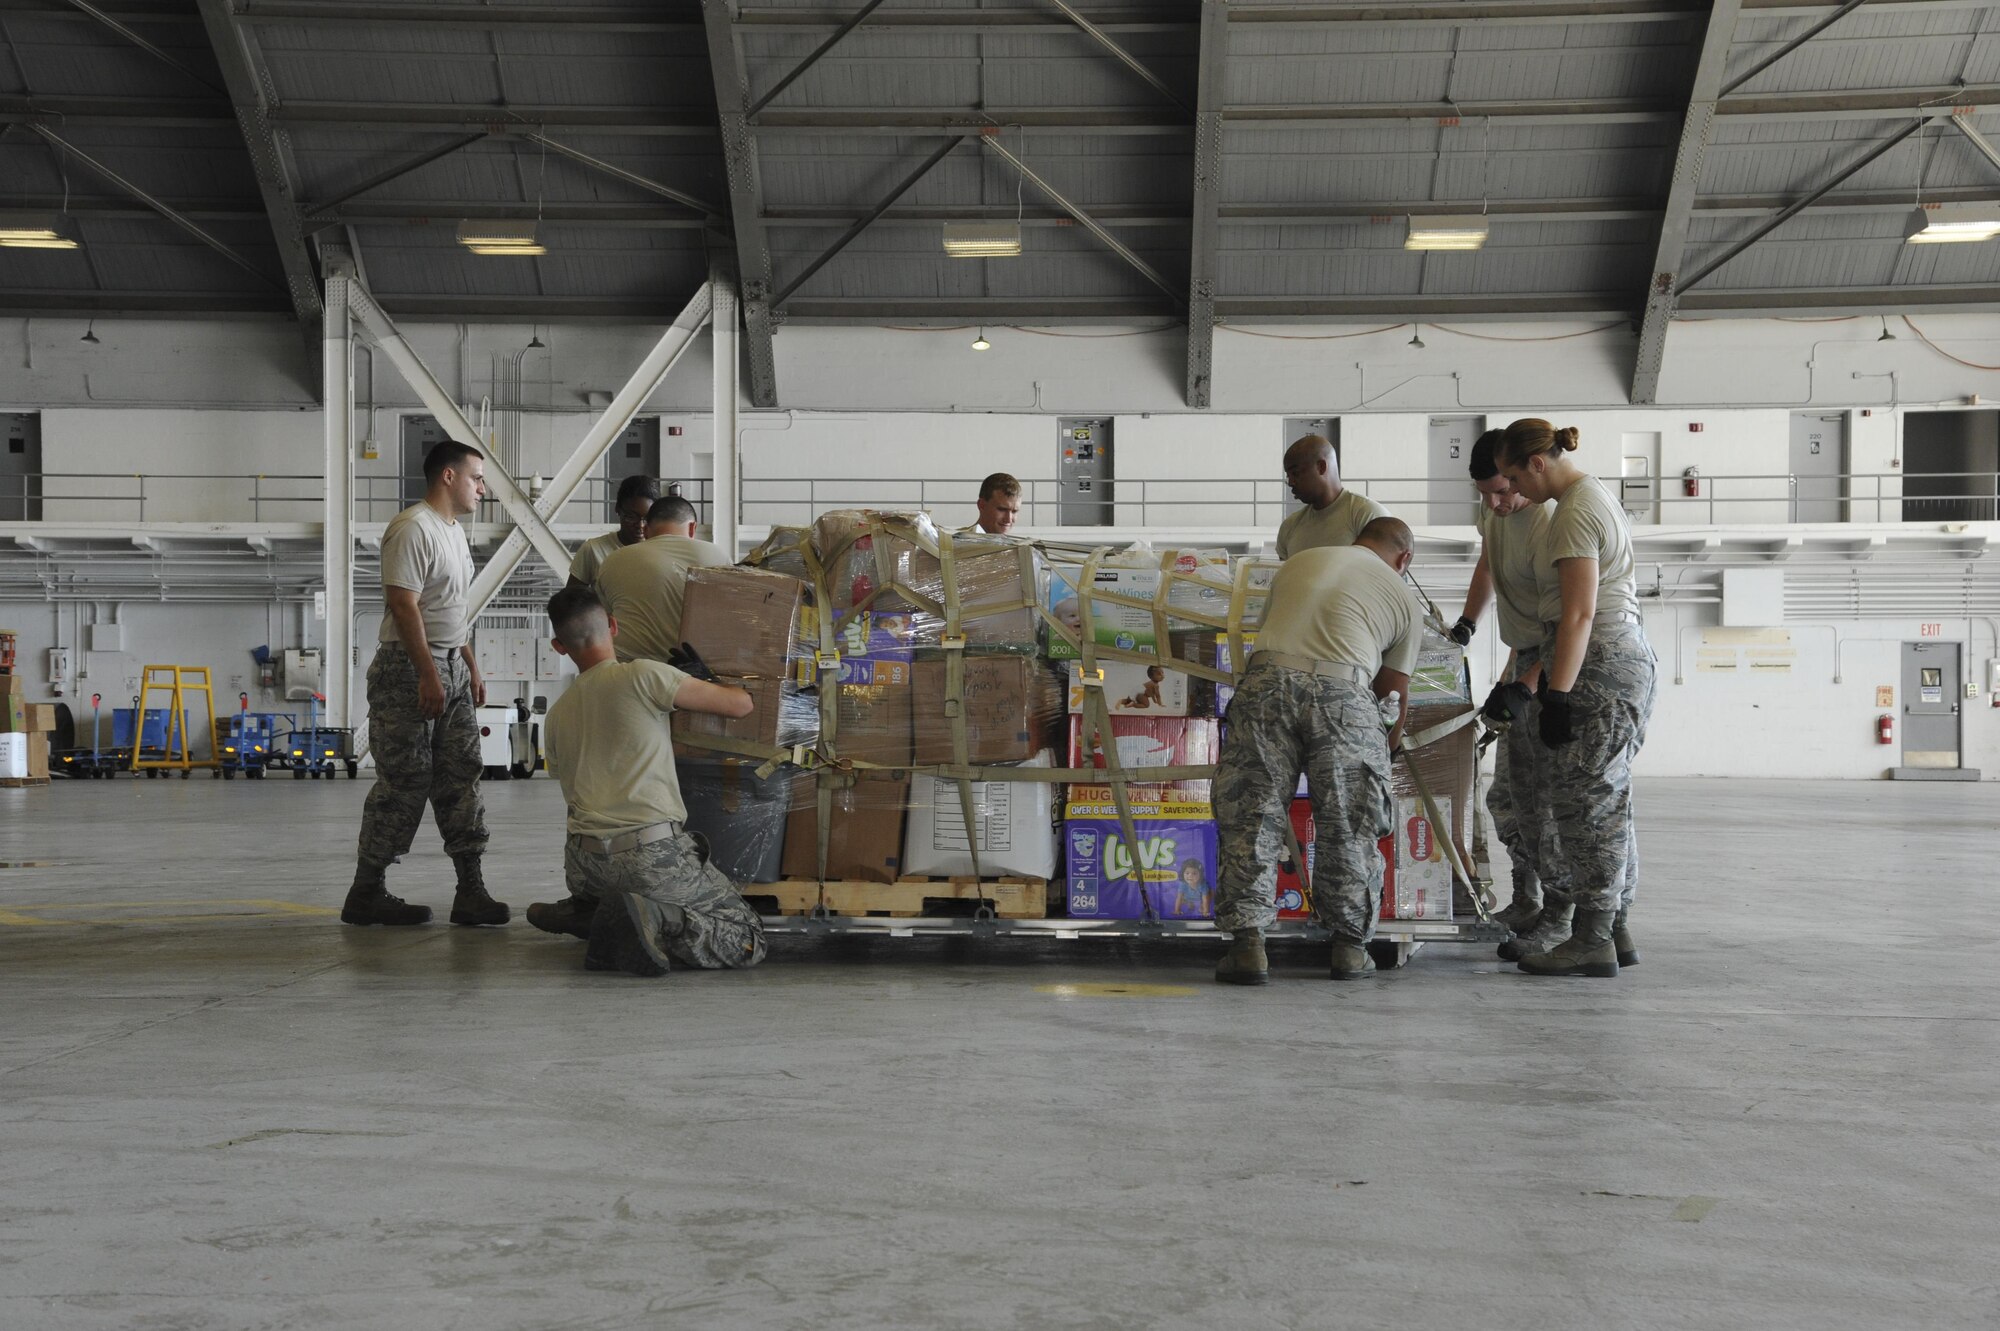 U.S. Air Force Airmen with the 6th Logistics Readiness Squadron (LRS) tighten straps on a pallet to be loaded onto a C-130 Hercules aircraft at MacDill Air Force Base, Fla., Oct. 4, 2017.